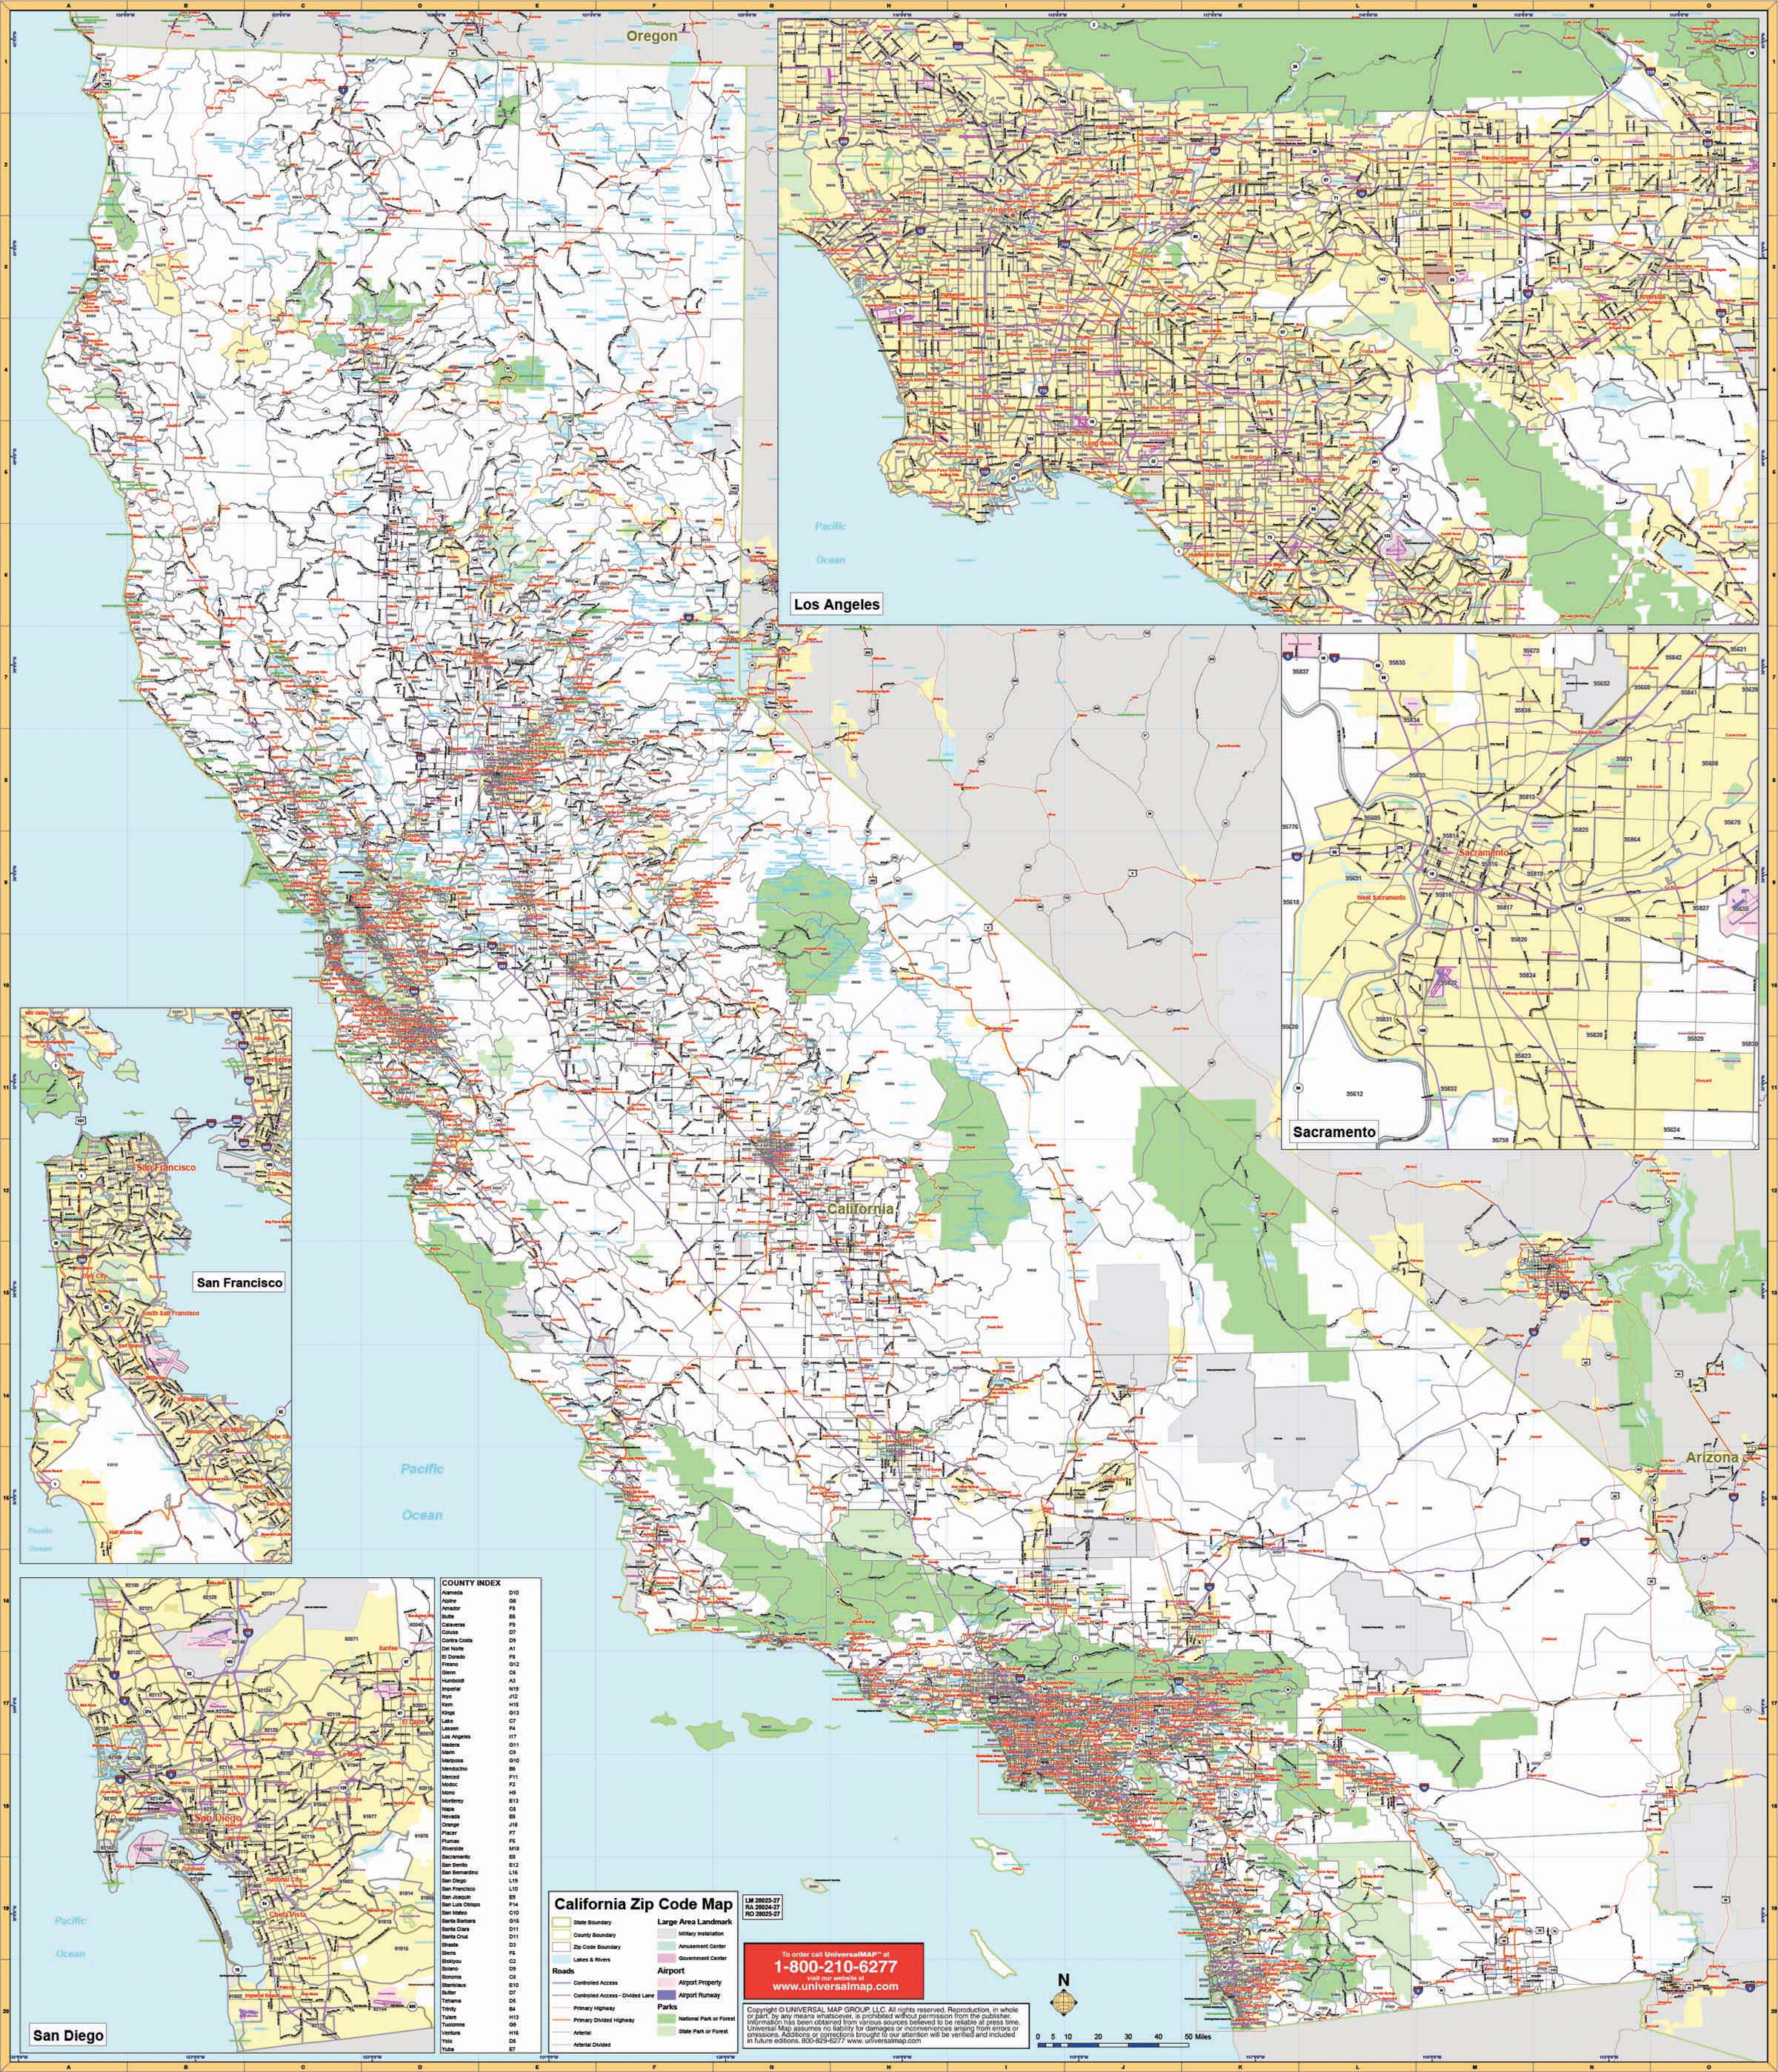 Mdc Ca Wmb Previewfull Map Of Cities Southern California Wall Map - Southern California Wall Map